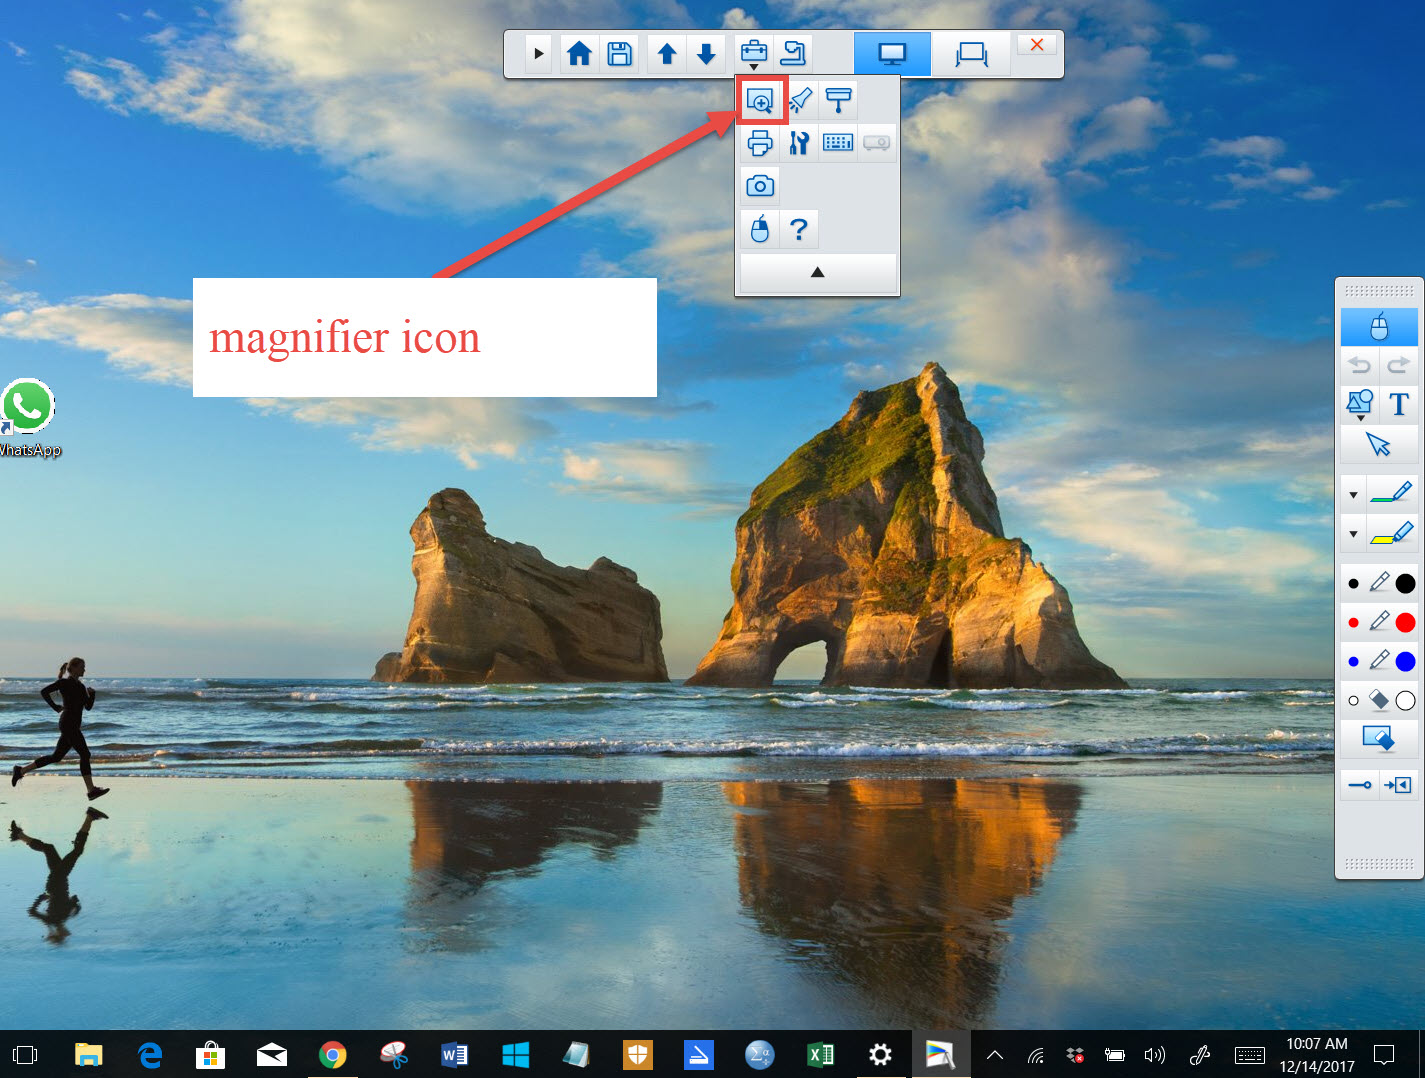 select the magnifier icon